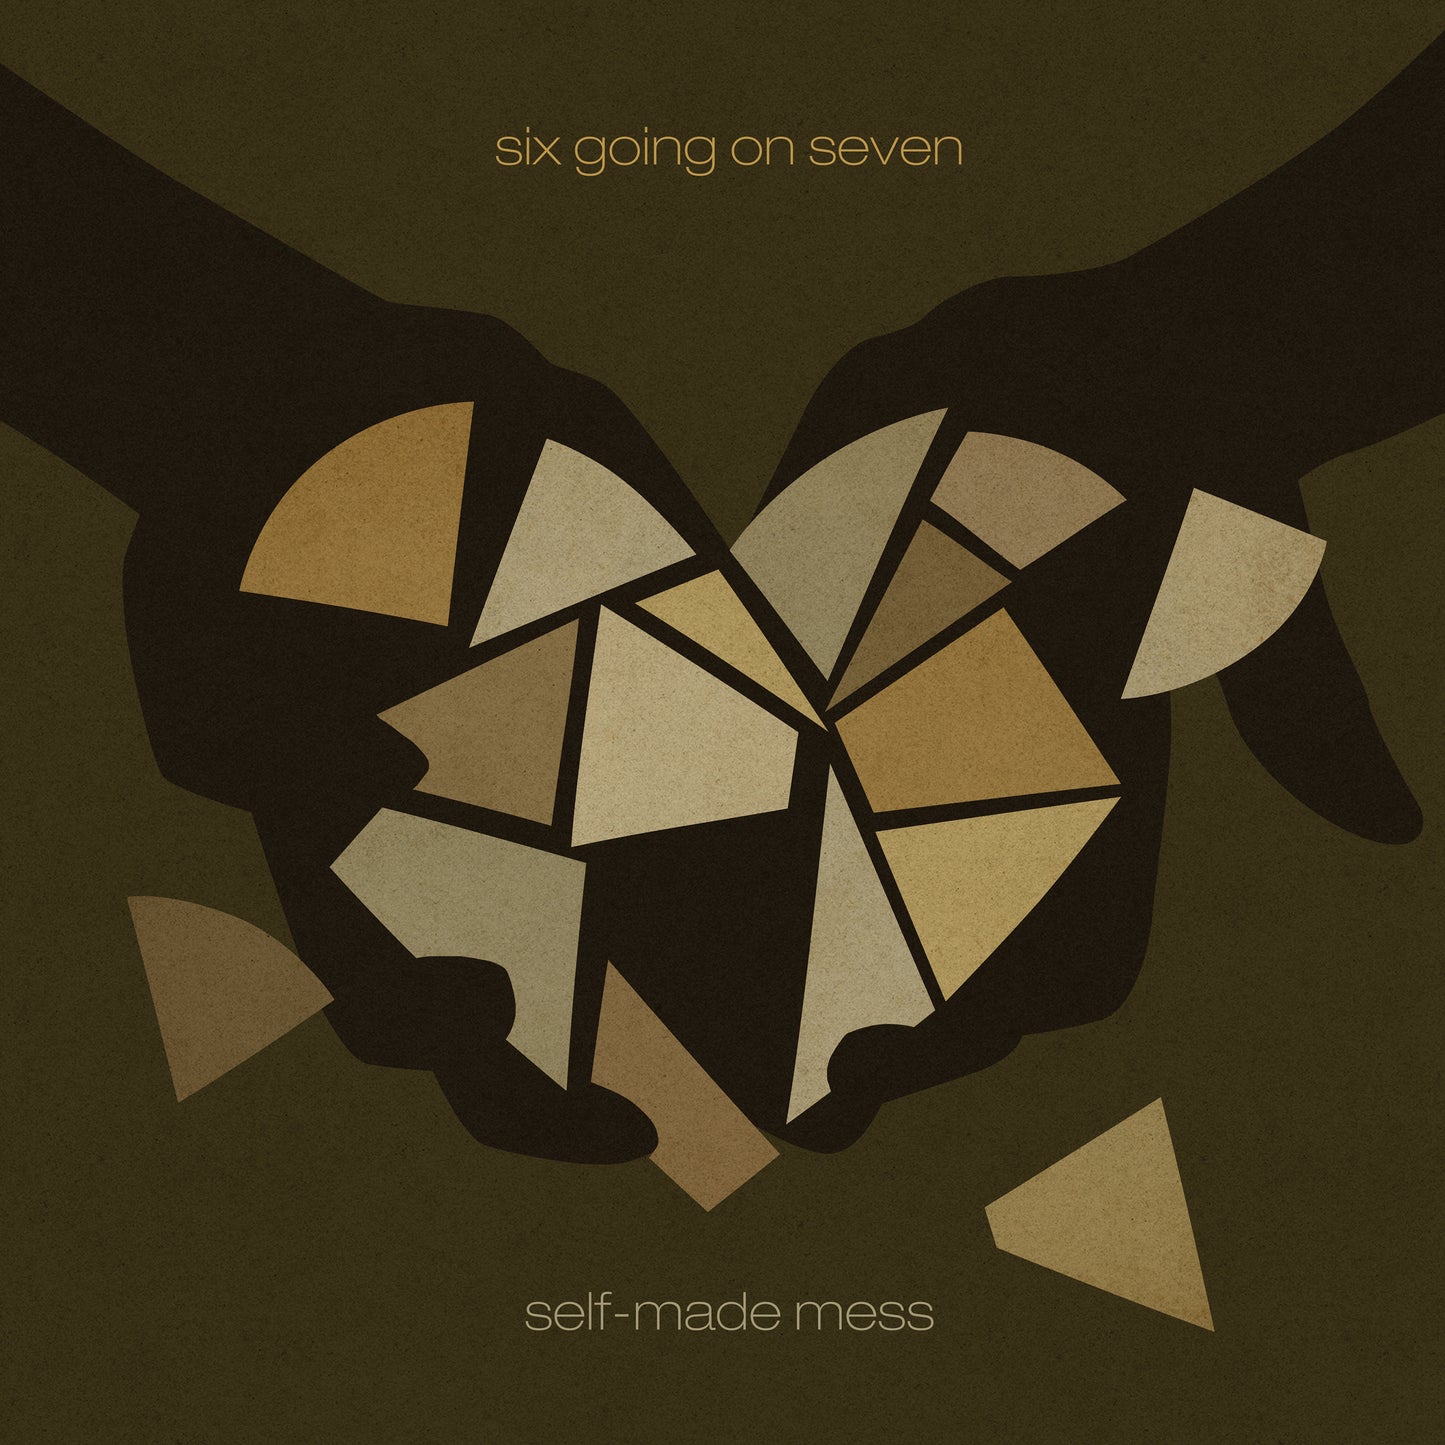 Six Going On Seven  “Self-Made Mess” LP